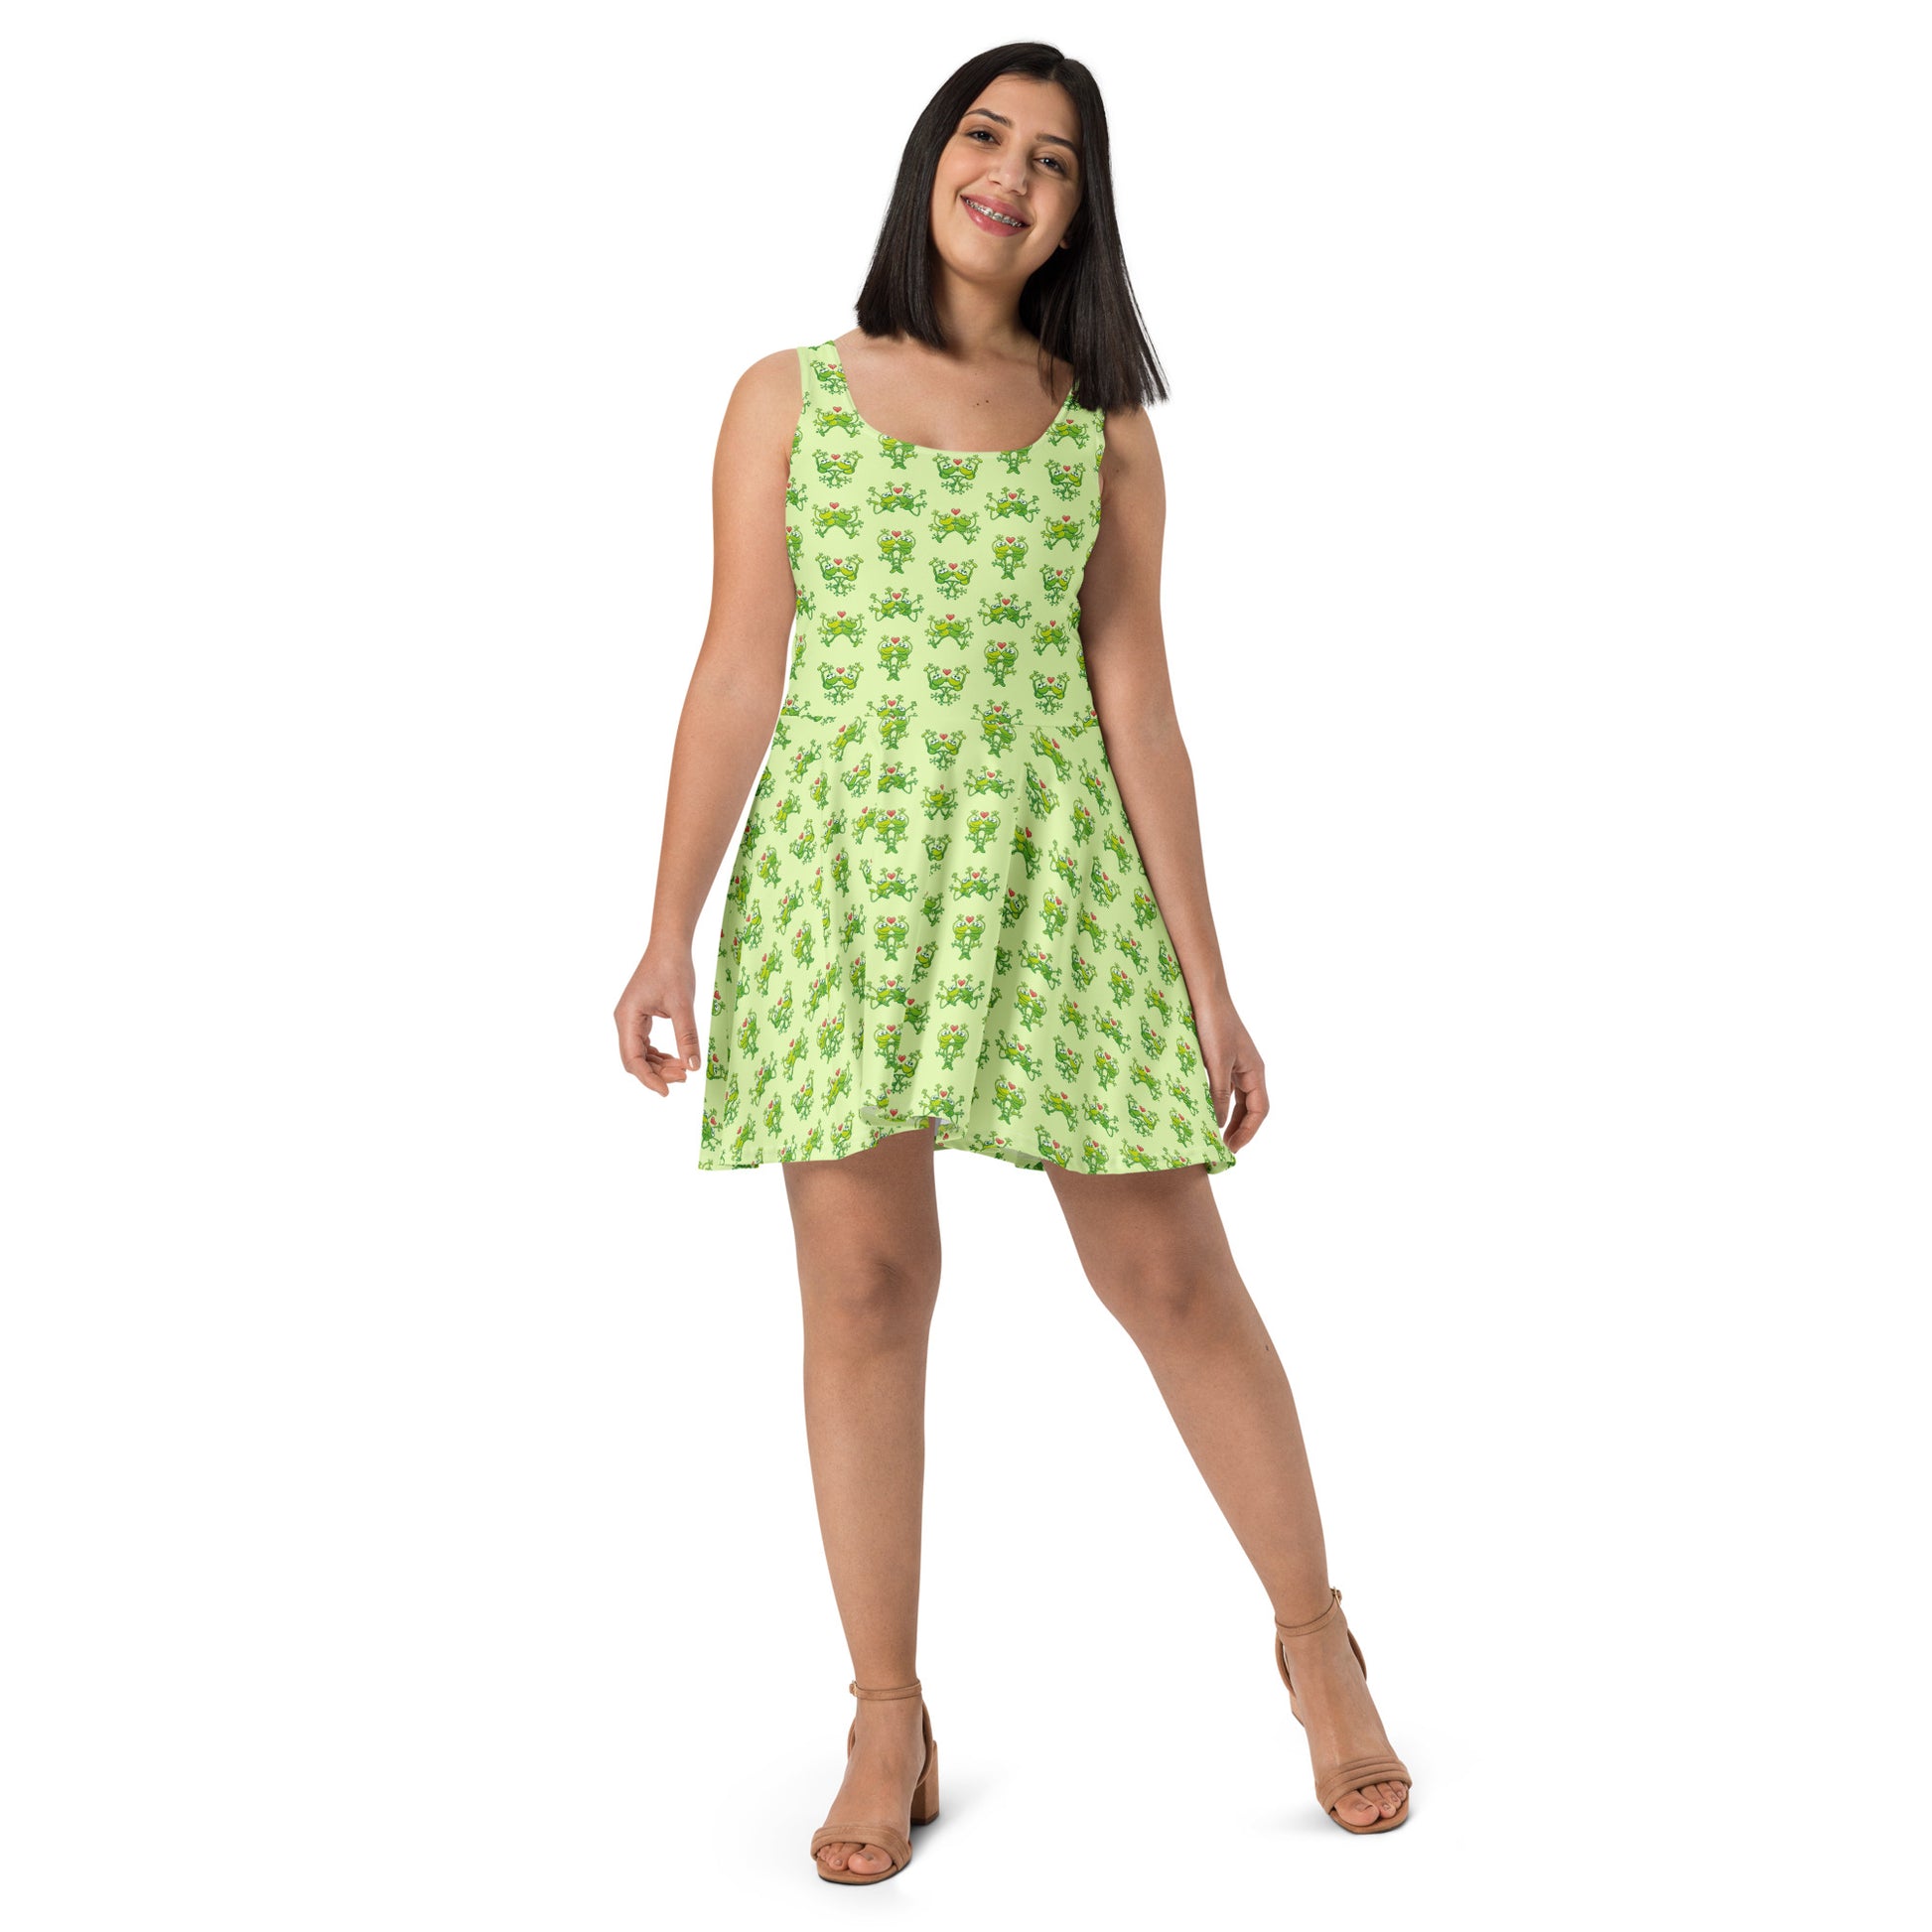 Green frogs are calling for love Skater Dress. Front view